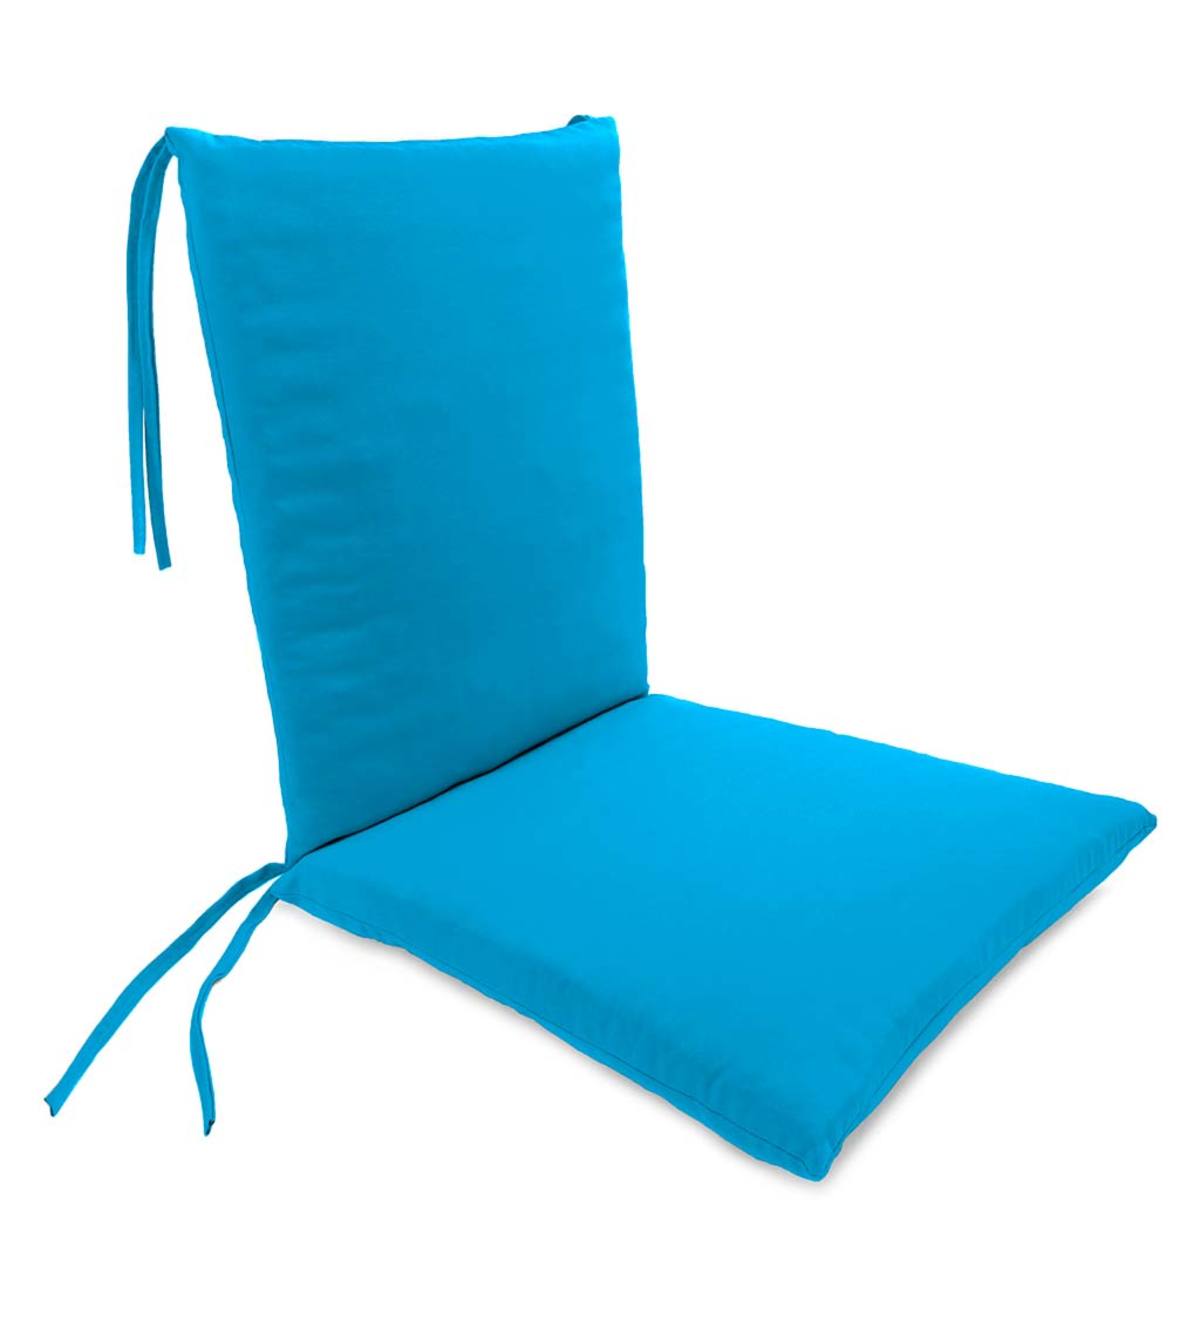 Rocking Chair Cushions, Outdoor Cushions For Porch Rocking Chairs